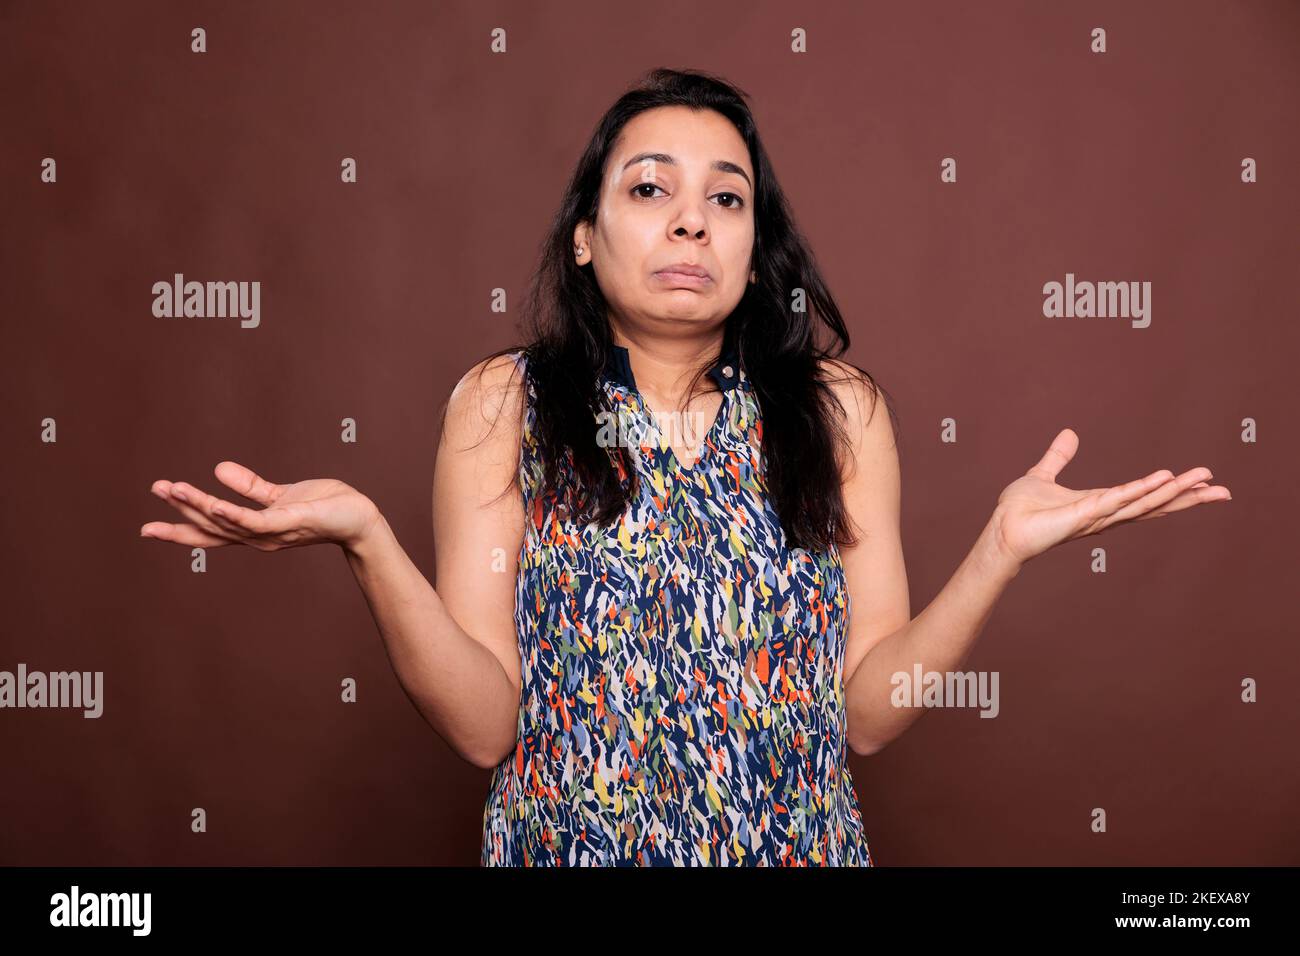 Puzzled indian woman shrugging shoulders with questioning facial expression portrait. Confused lady standing with hands spread wide, doubting, looking at camera, front view mid shot Stock Photo